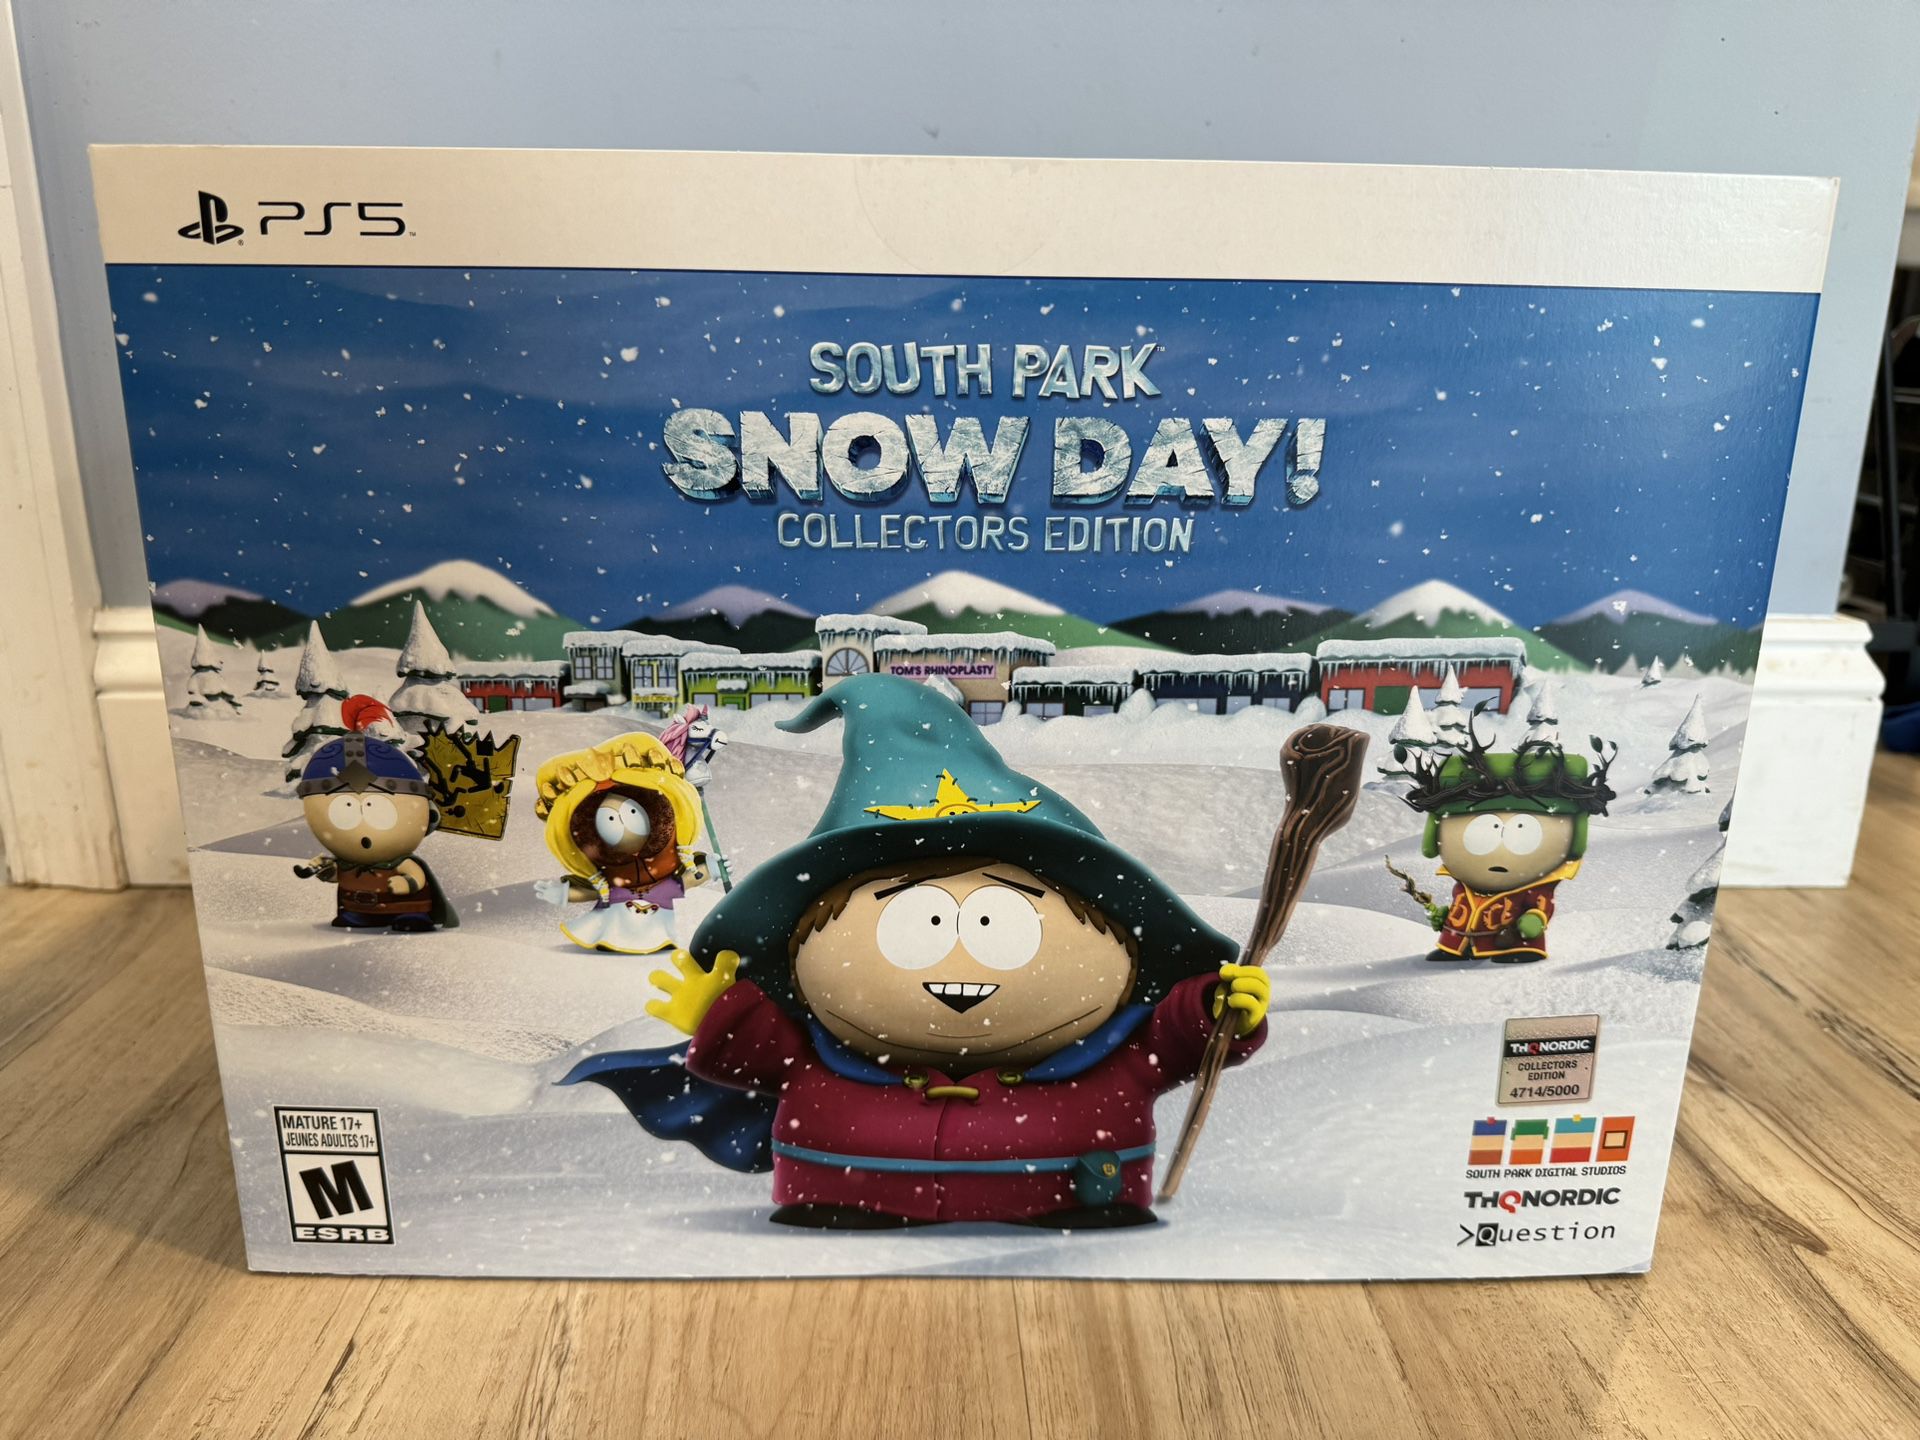 SOUTH PARK SNOW DAY! Collectors Edition Playstation 5 Sony PS5